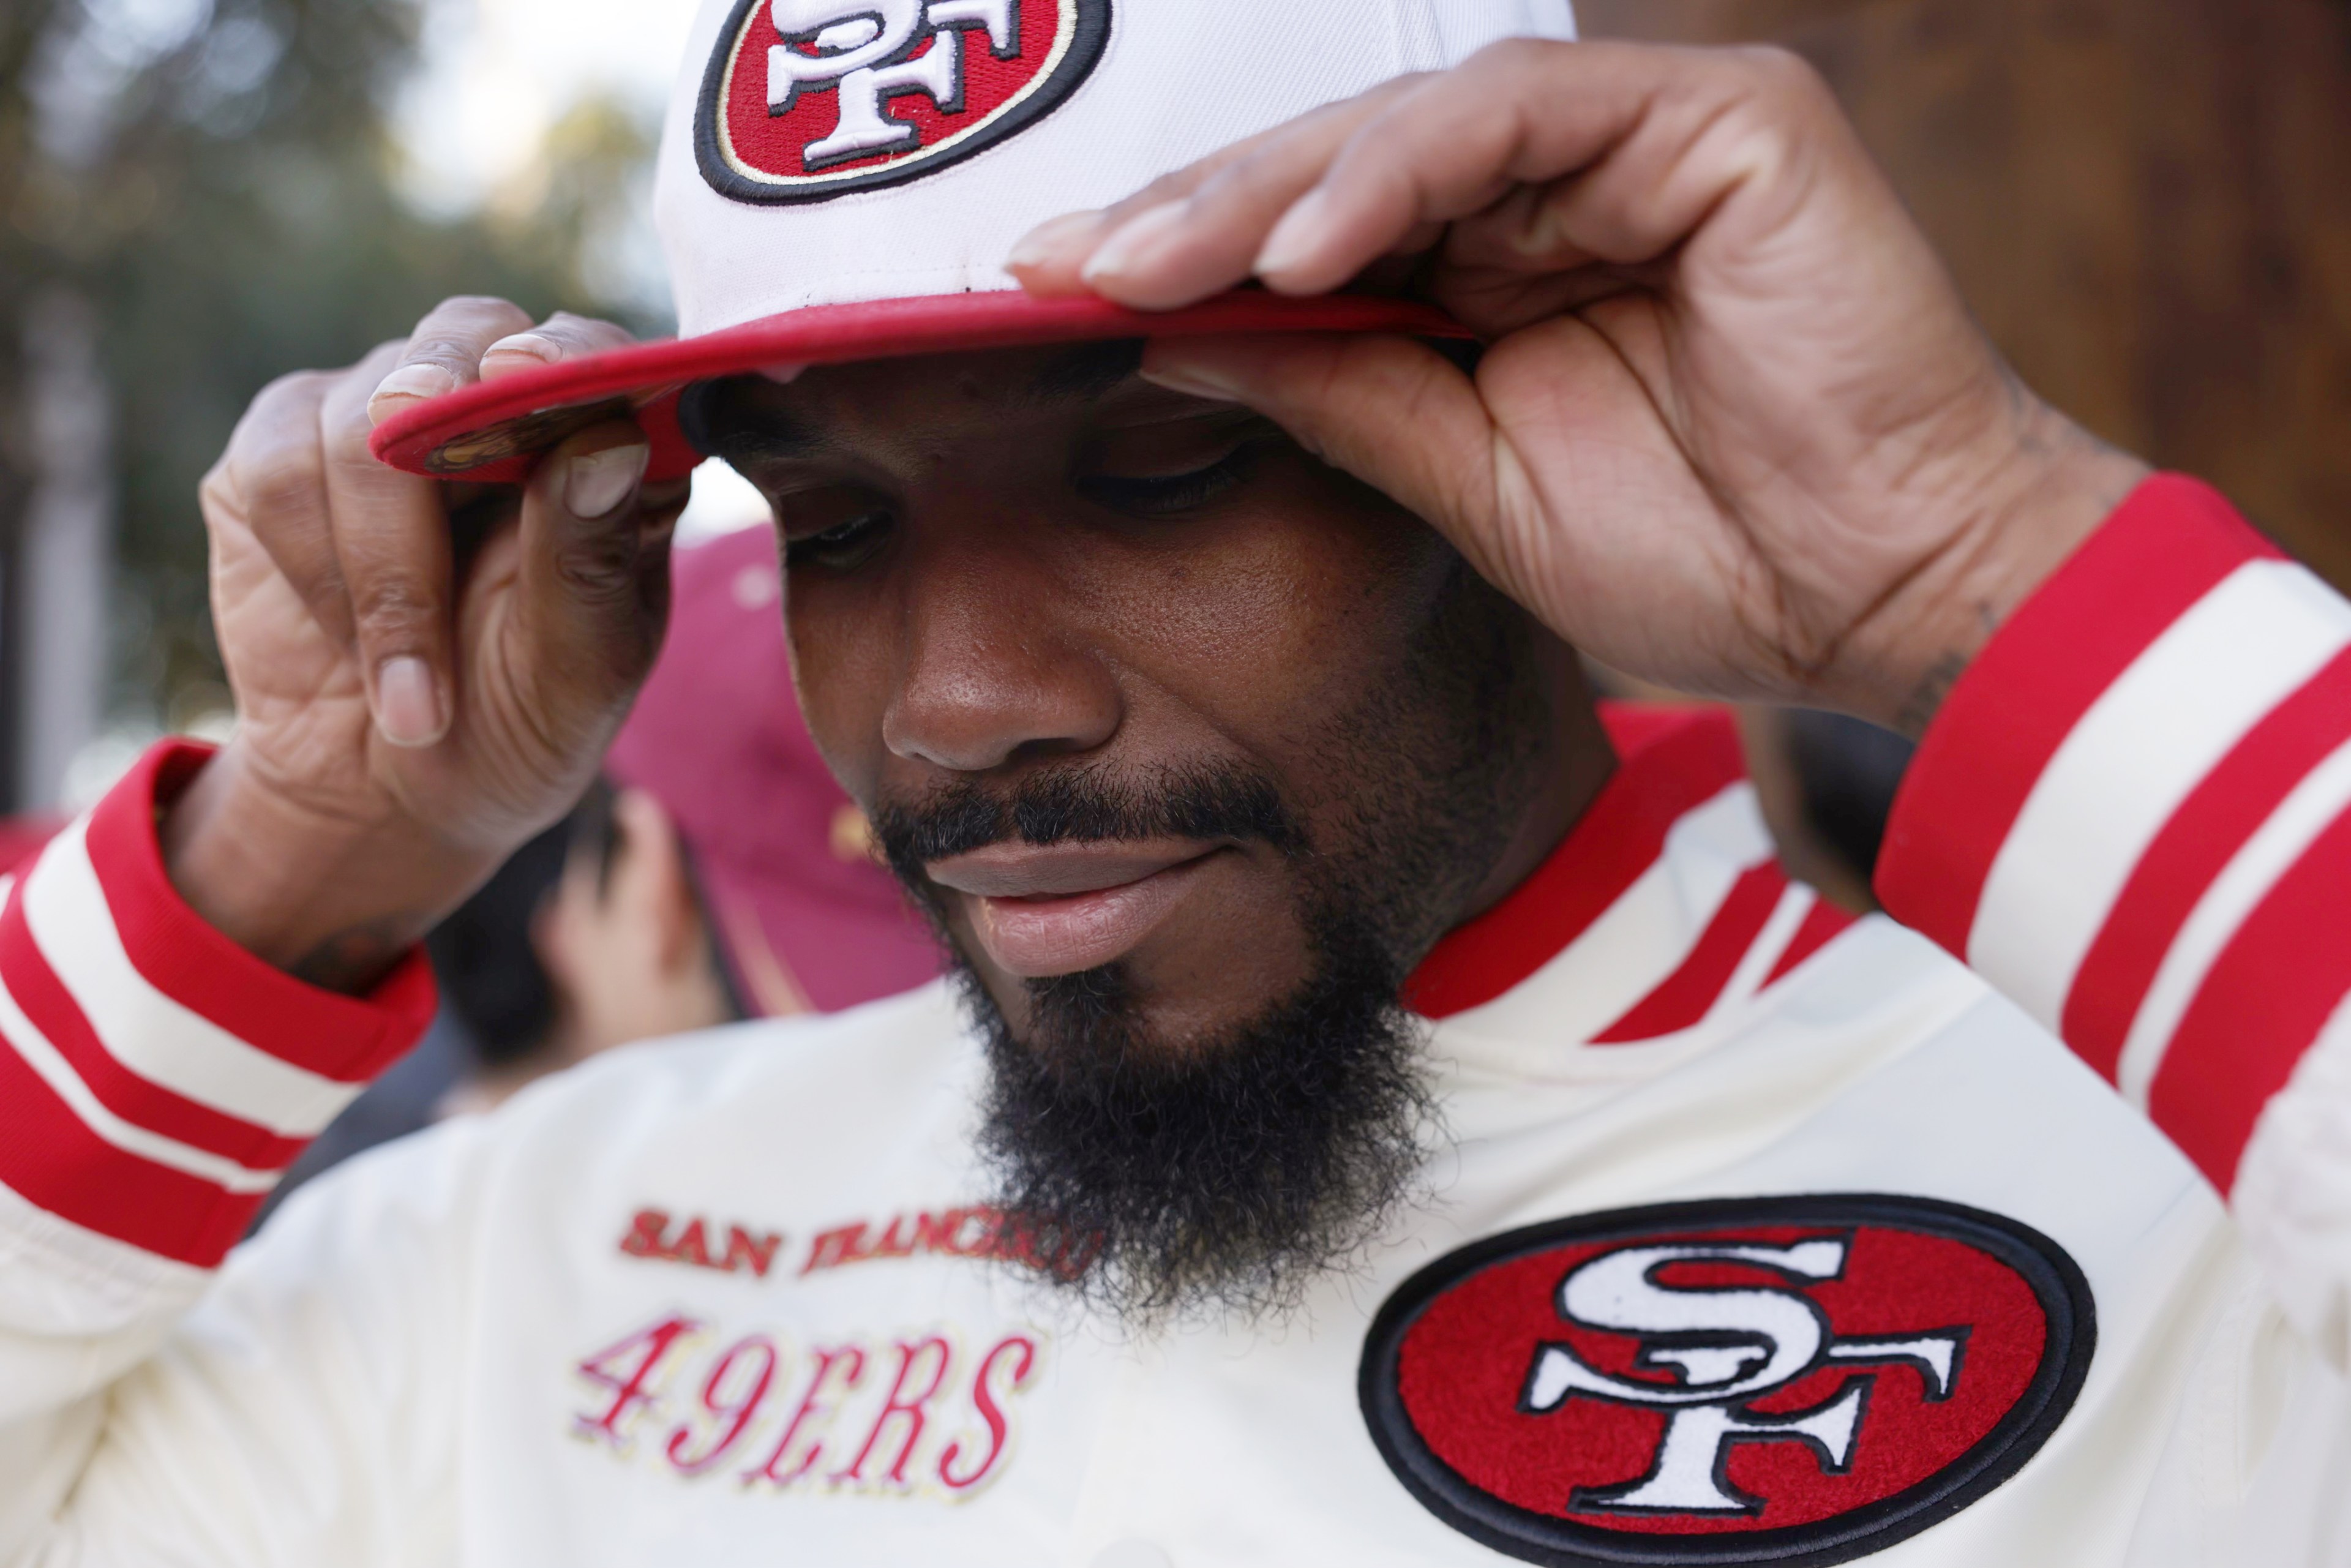 49ers fan tilts white and red cap